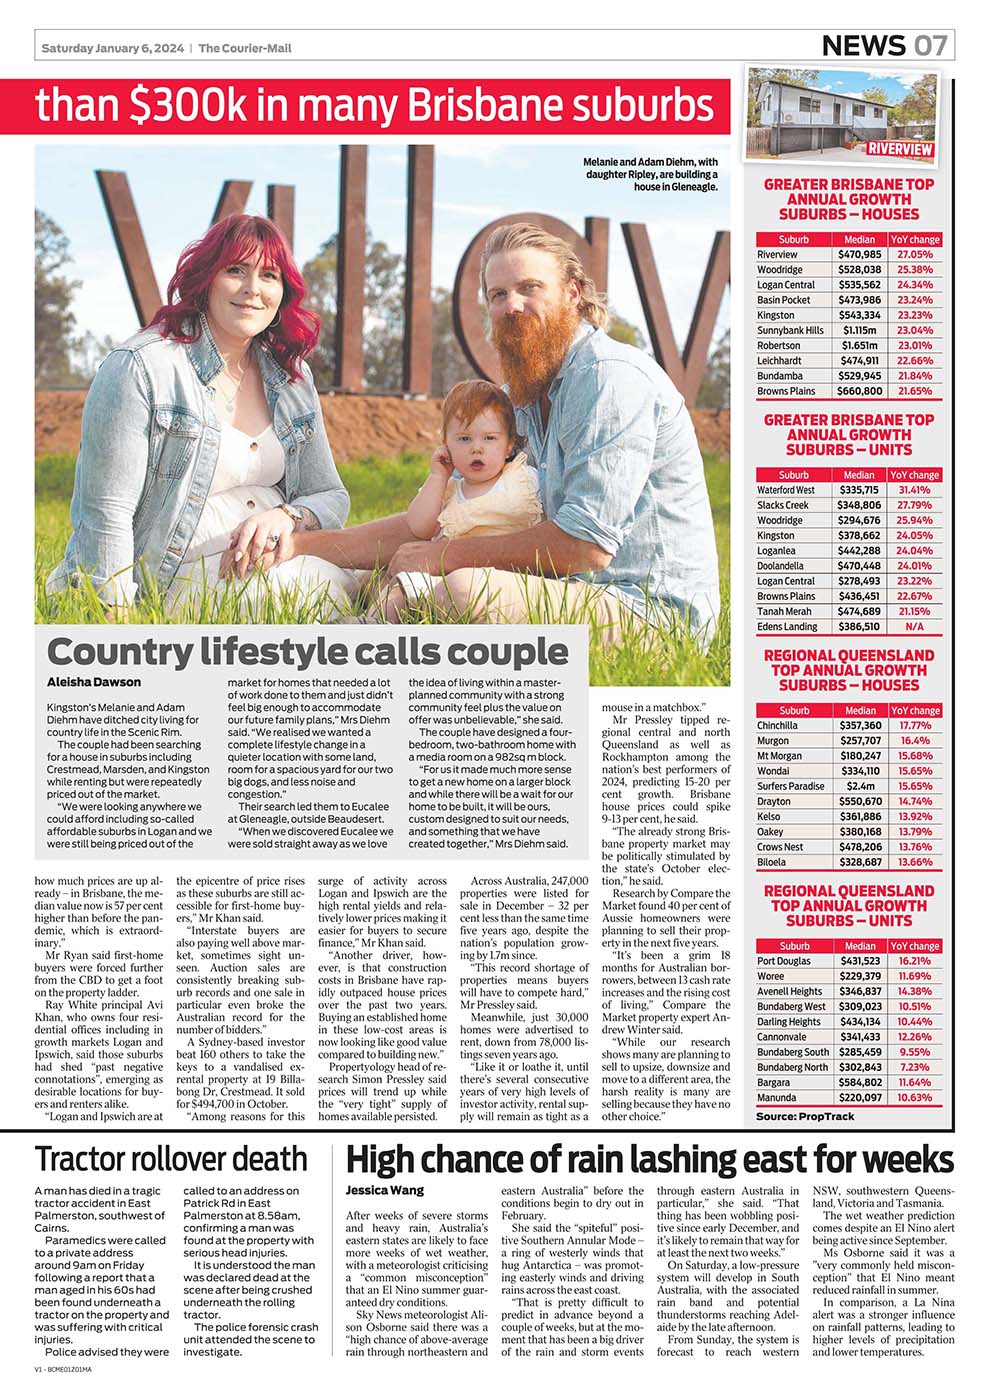 Country Lifestyle Calls Couple 060124